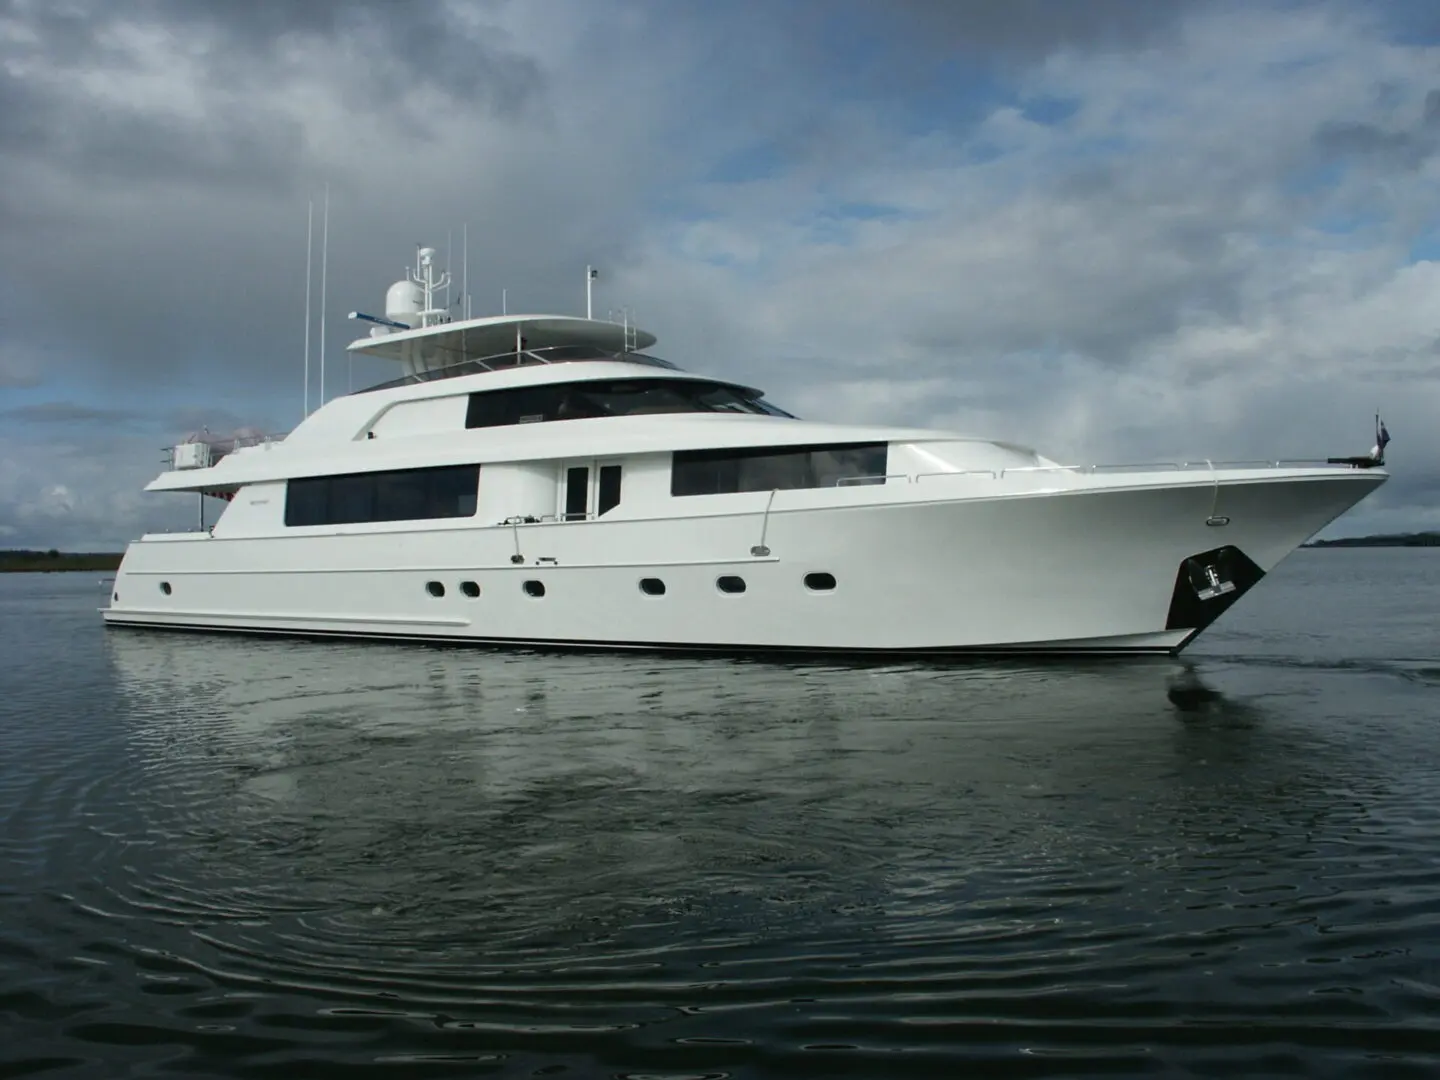 Side view of the Vita Bella yacht by the ocean